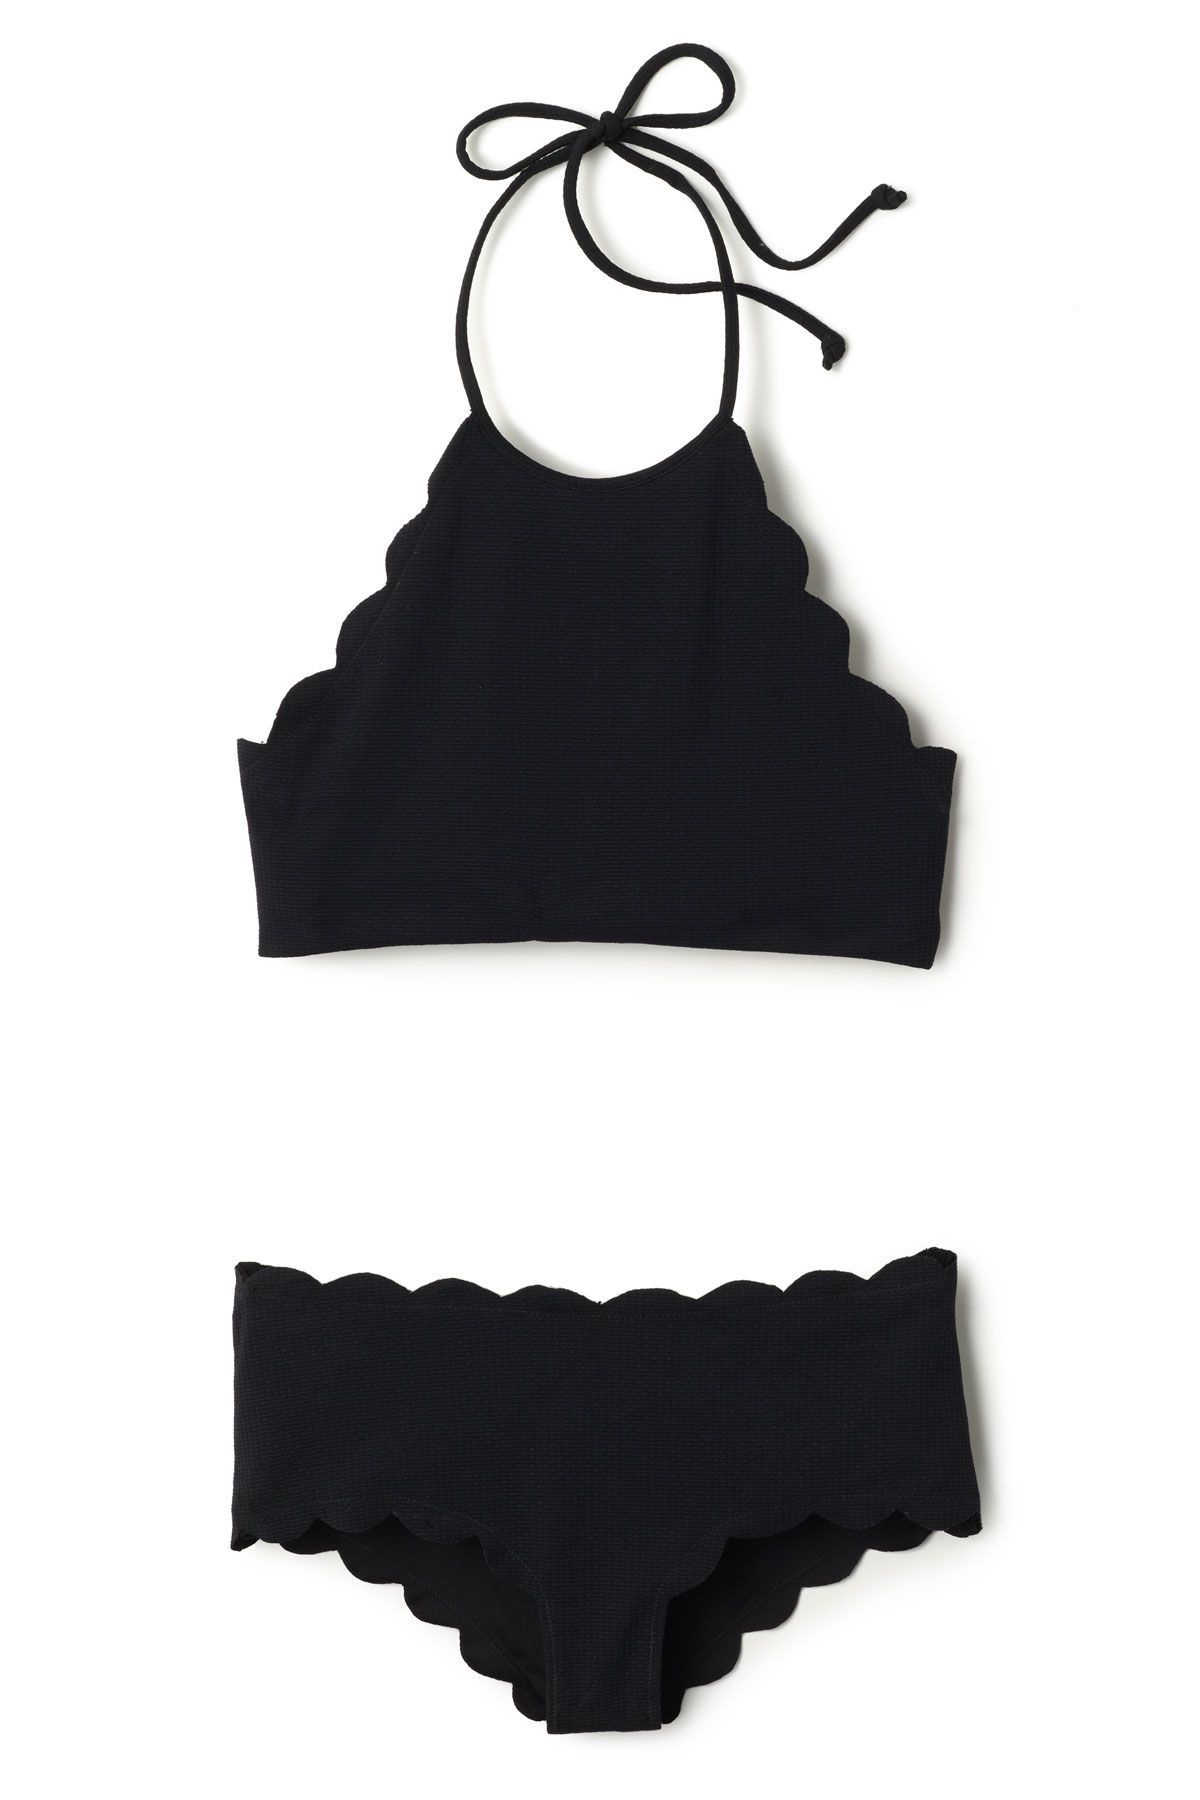 Marysia’s Antibes Scallop High Neck Halter Top | Everything But Water